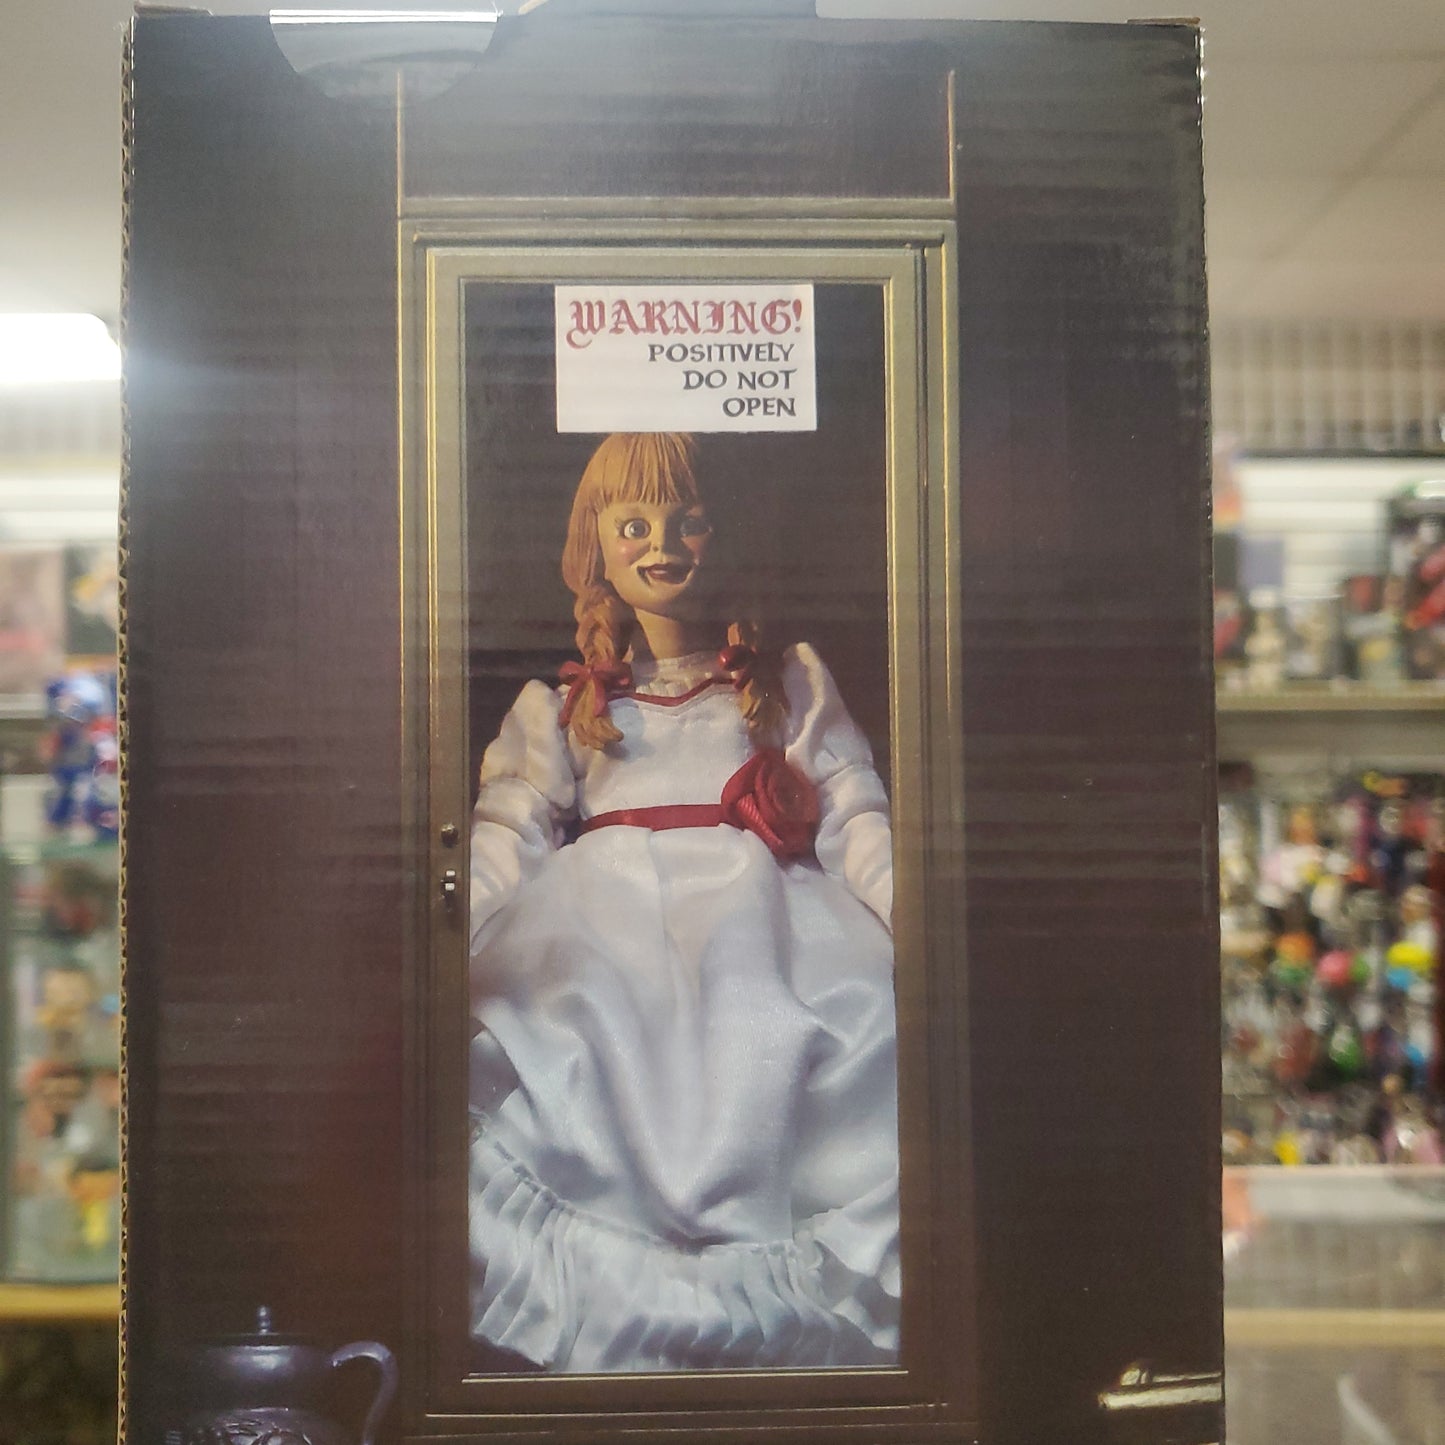 NECA The Conjuring Annabelle Clothed Action Figure